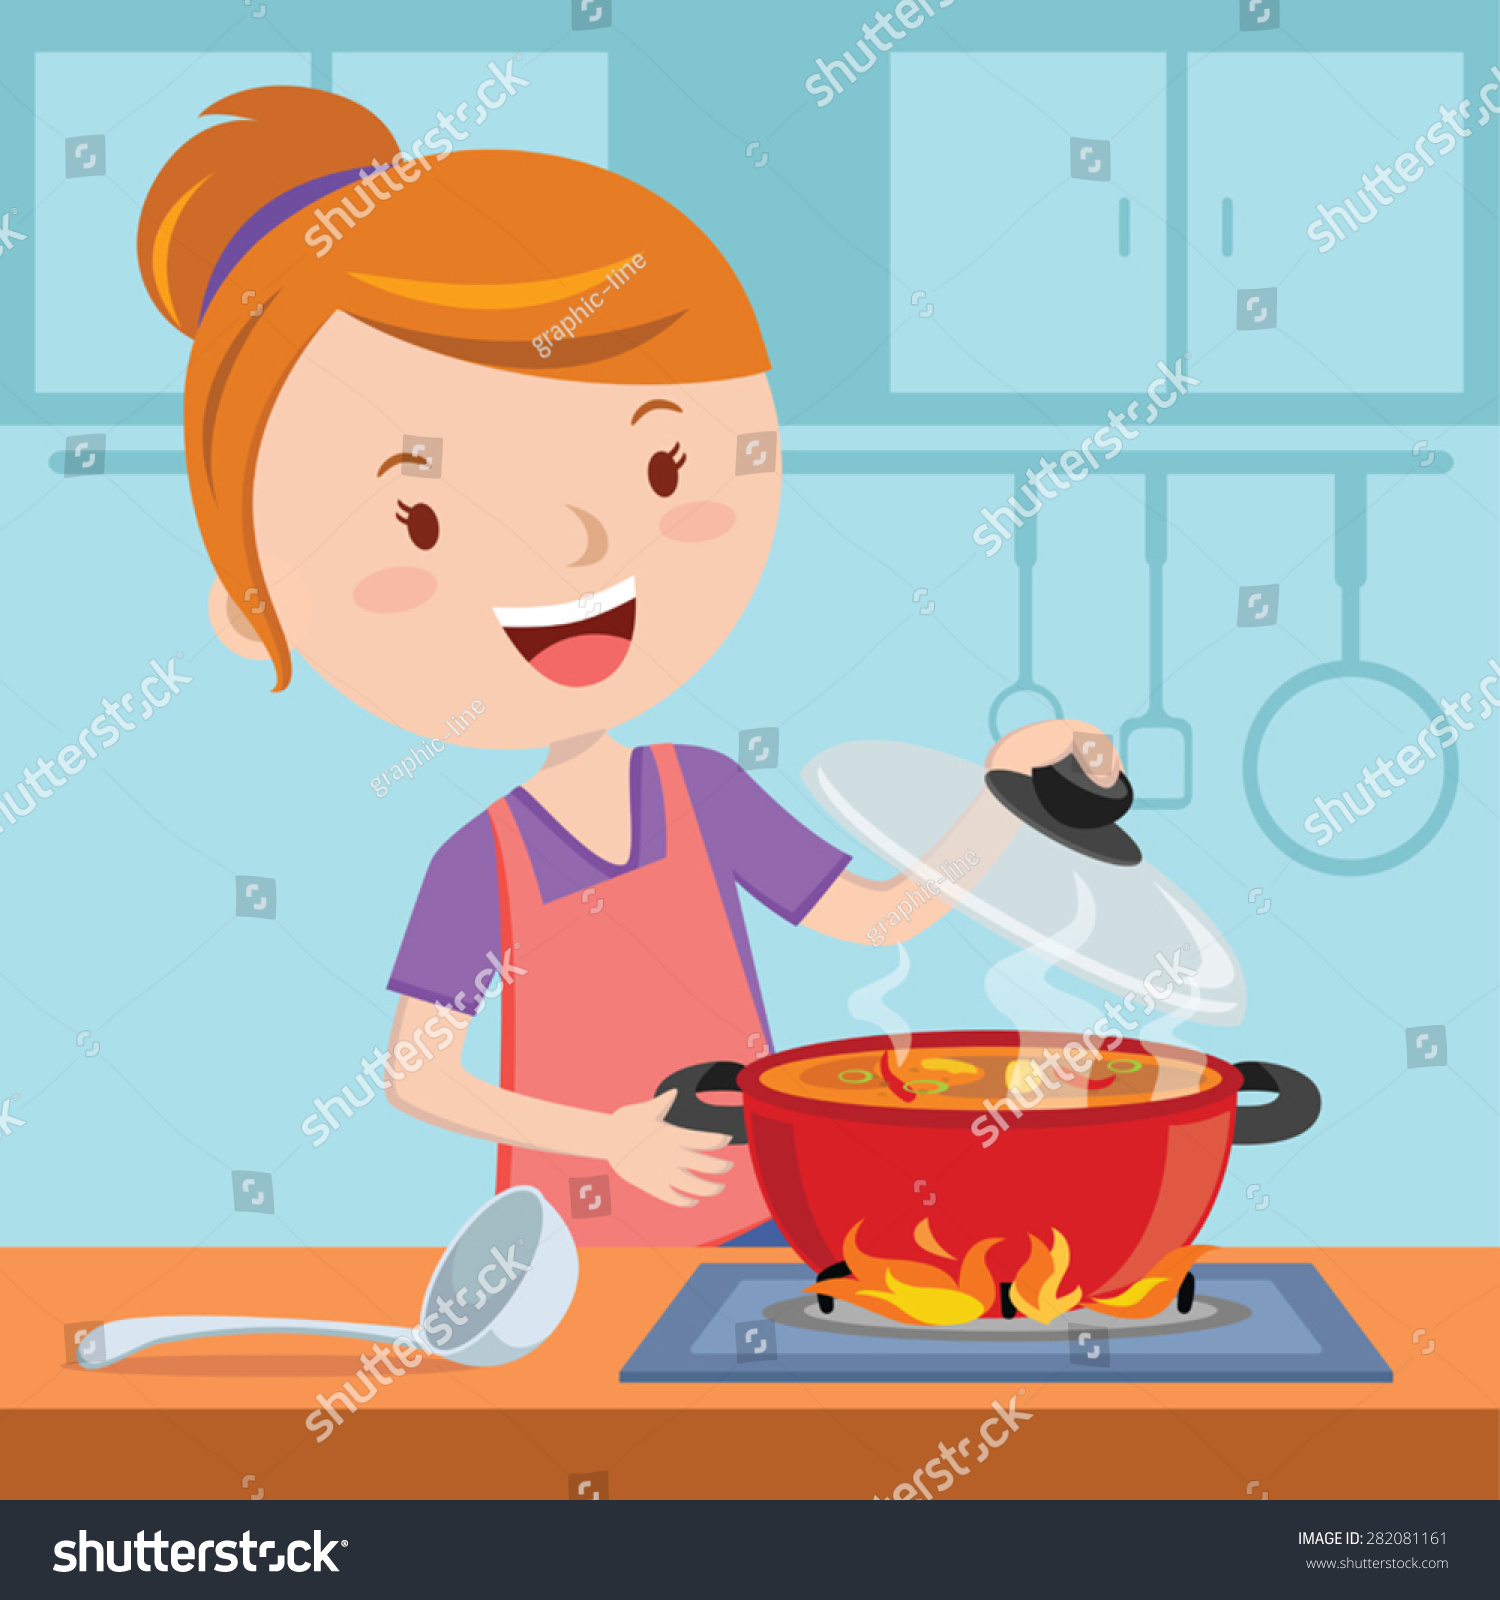 cooking dinner clipart - photo #49